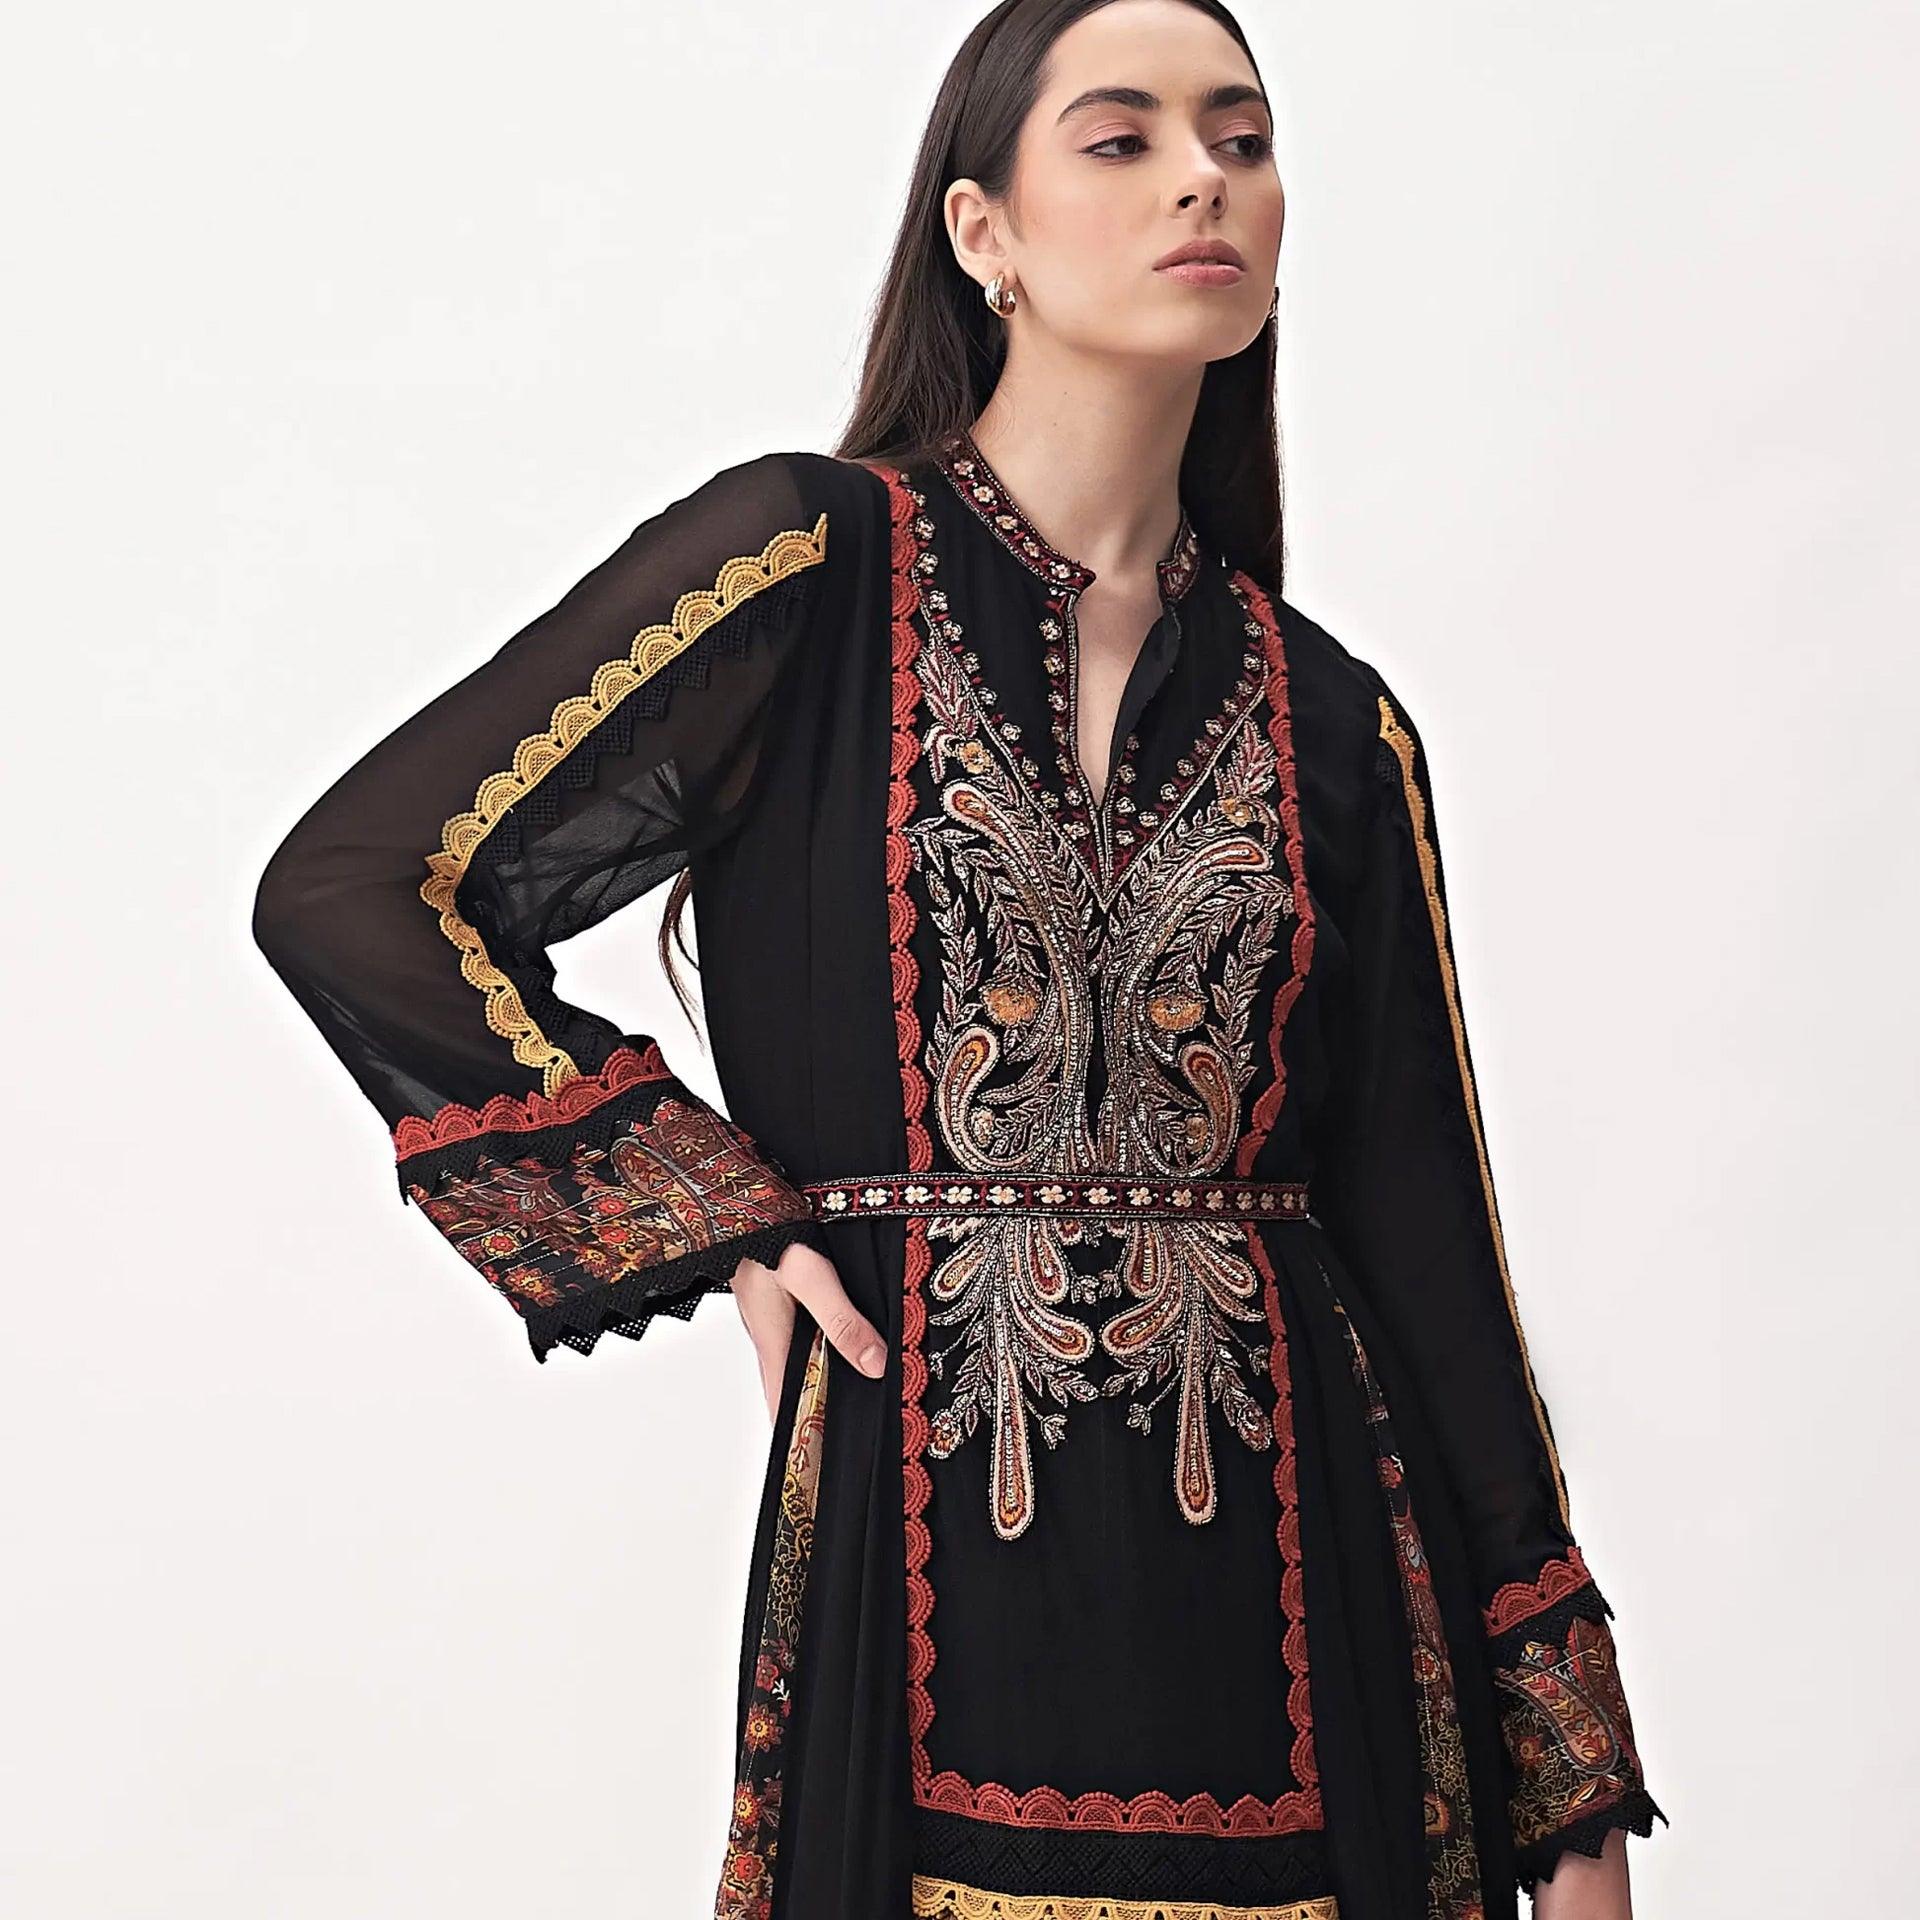 Black Embroidery Eozal Dress with Long Sleeves And Mixed Material From Shalky - WECRE8